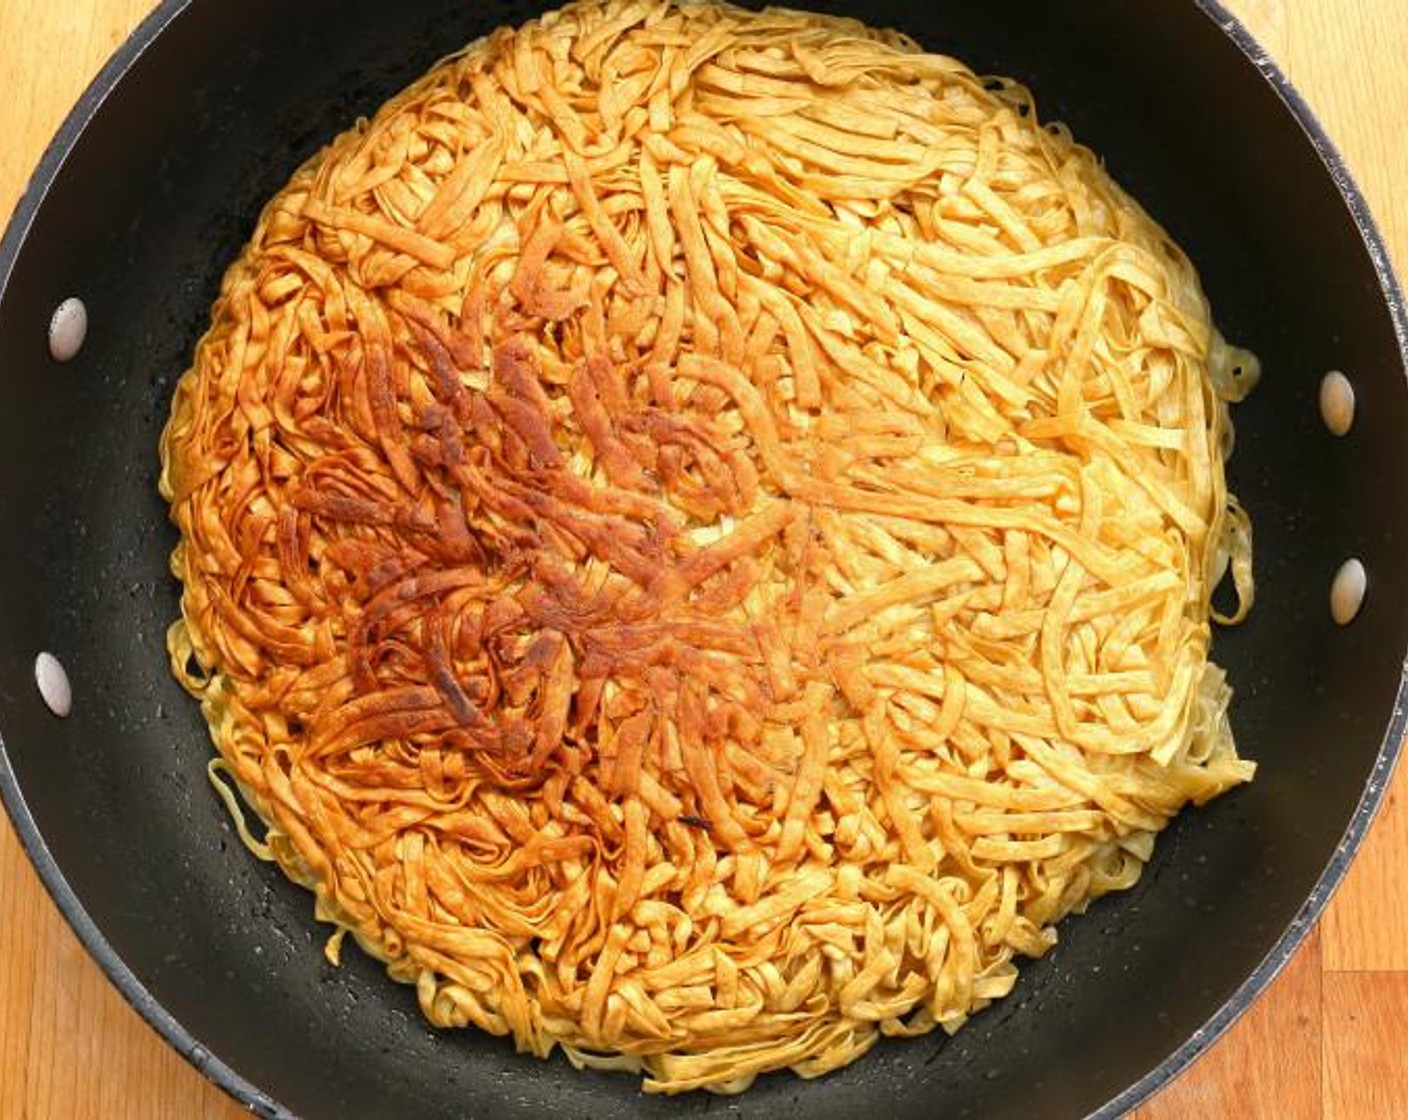 step 2 When the noodles are crisp, flip and cook on second side to a crisp and golden brown.